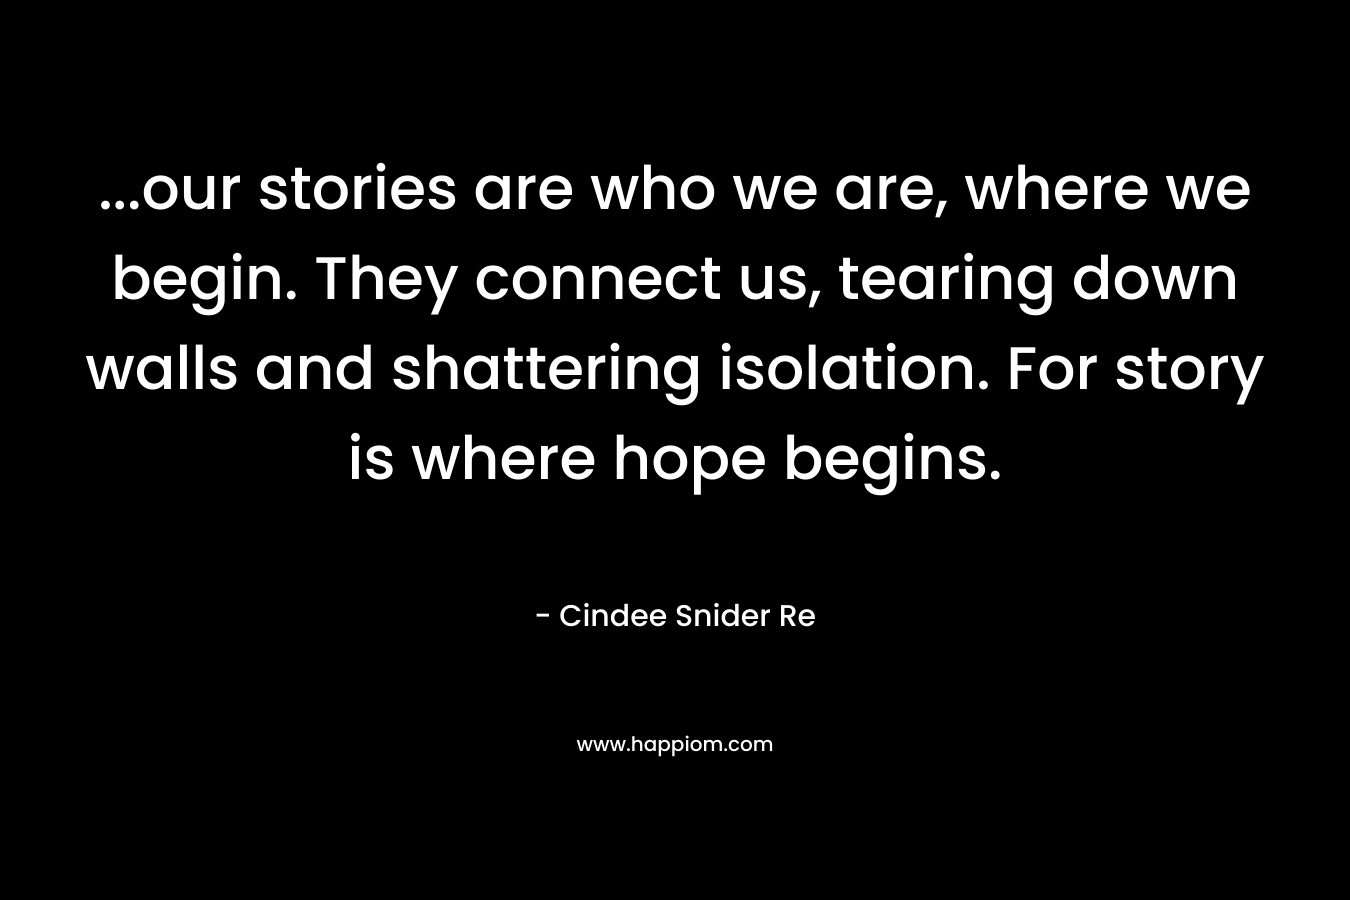 ...our stories are who we are, where we begin. They connect us, tearing down walls and shattering isolation. For story is where hope begins.